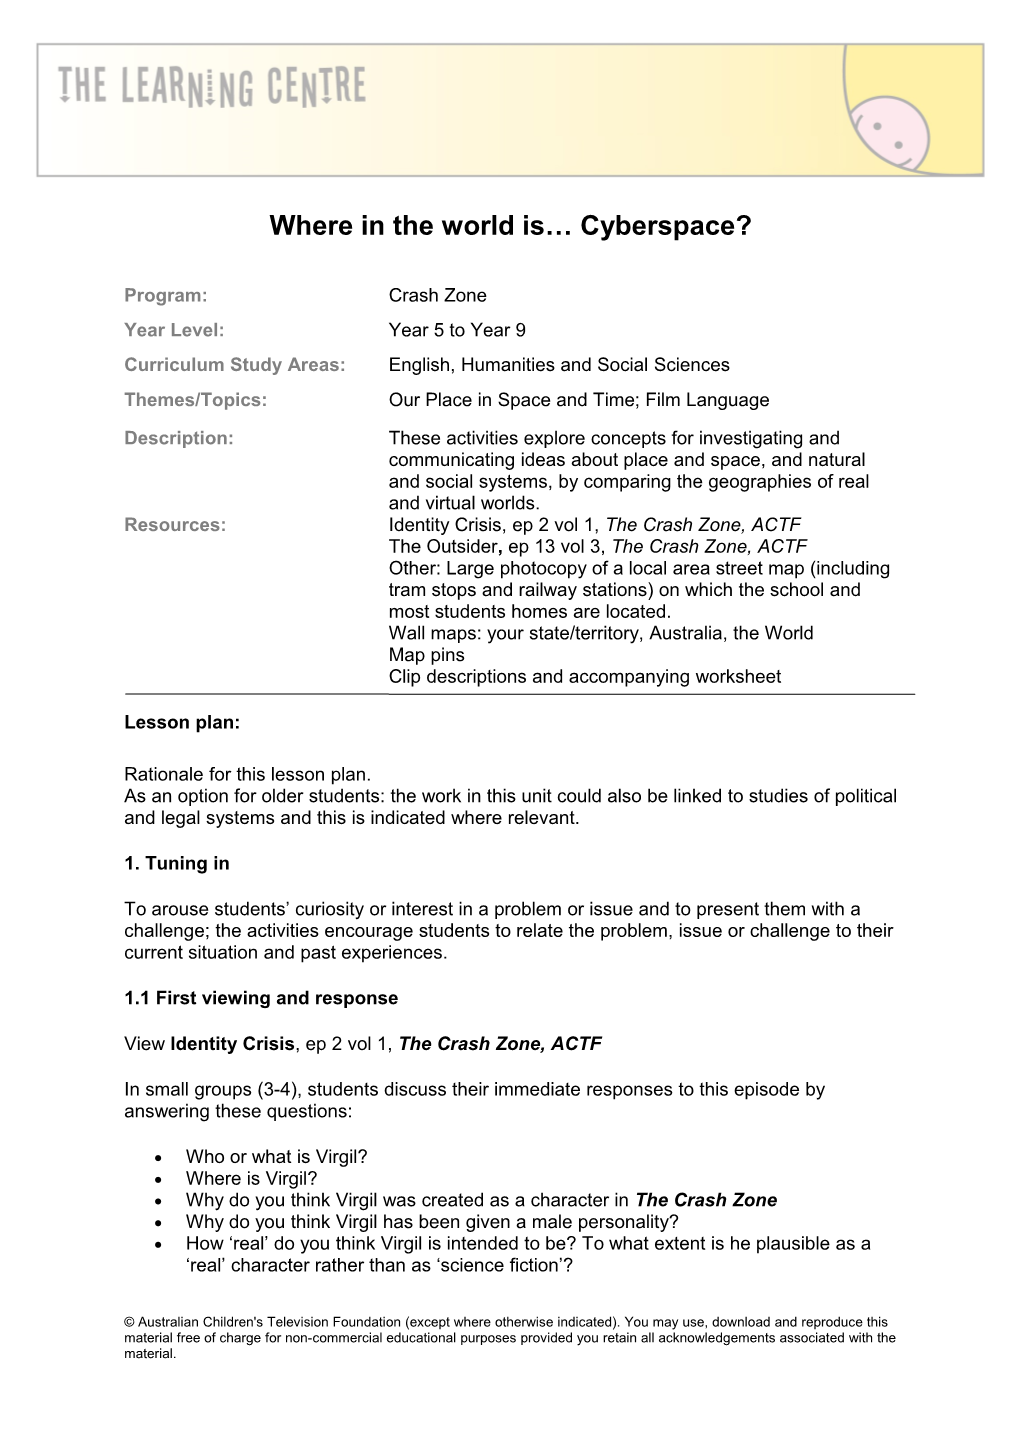 Where in the World Is Cyberspace?